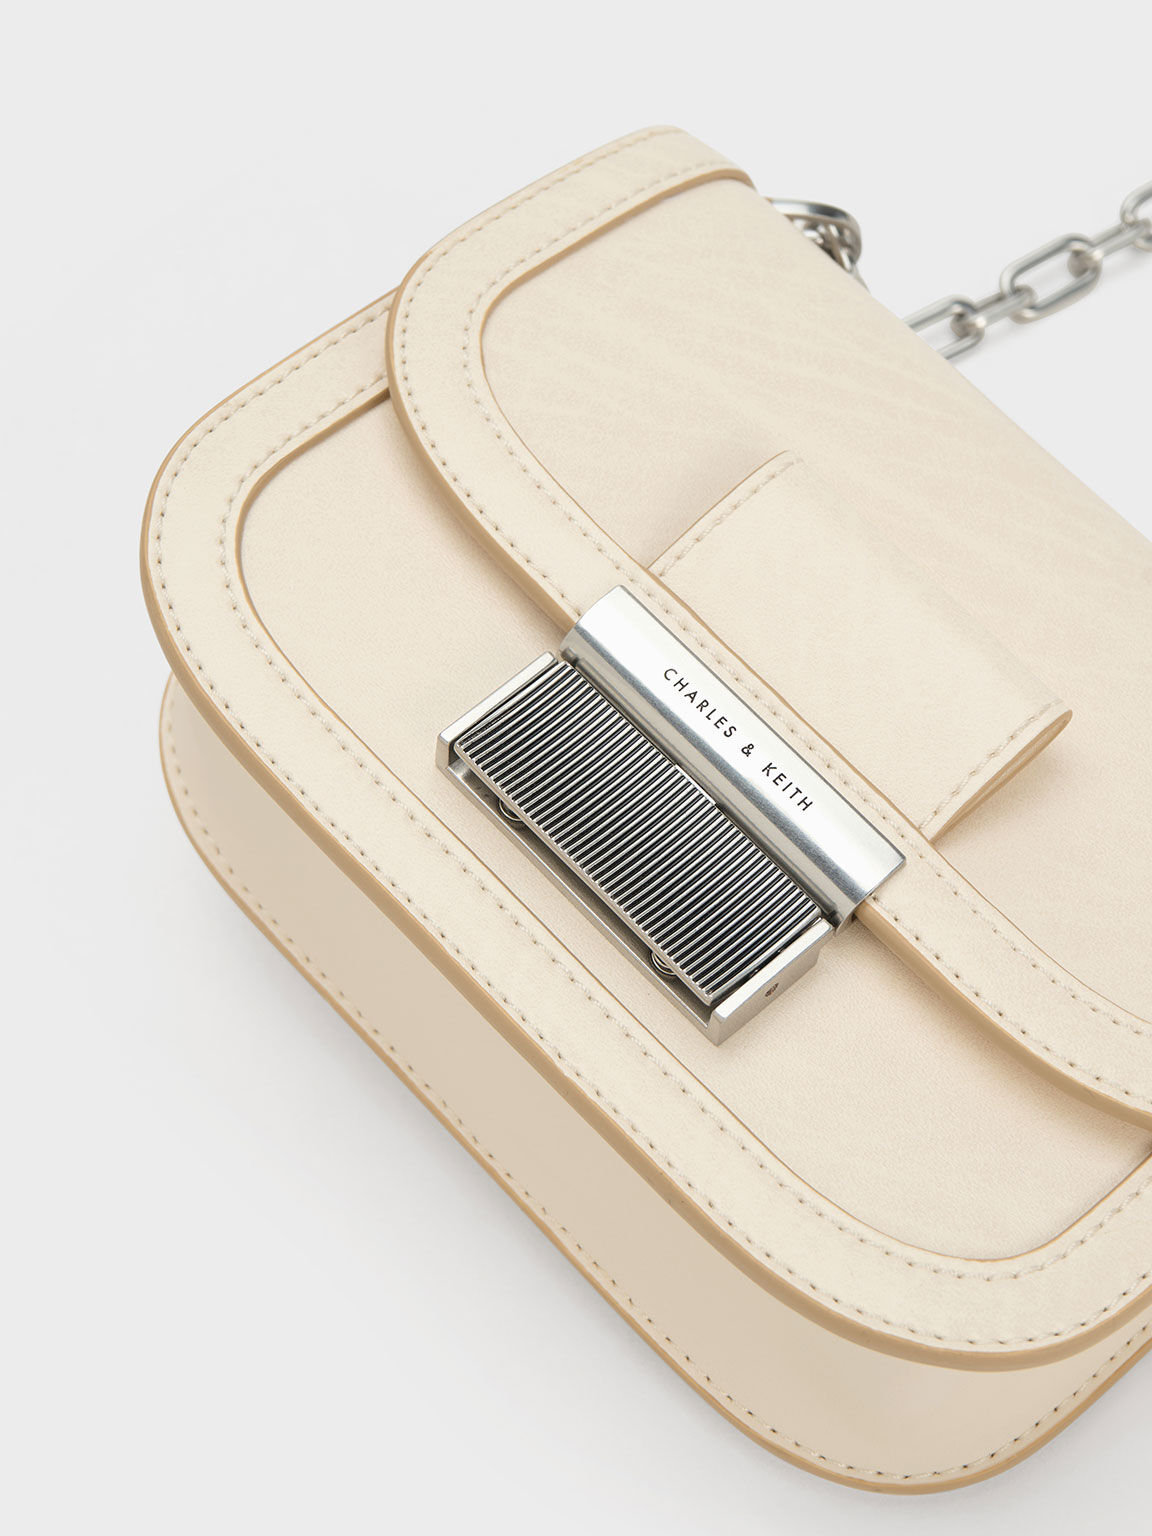 Essential Bags For Summer 2021 - CHARLES & KEITH DK